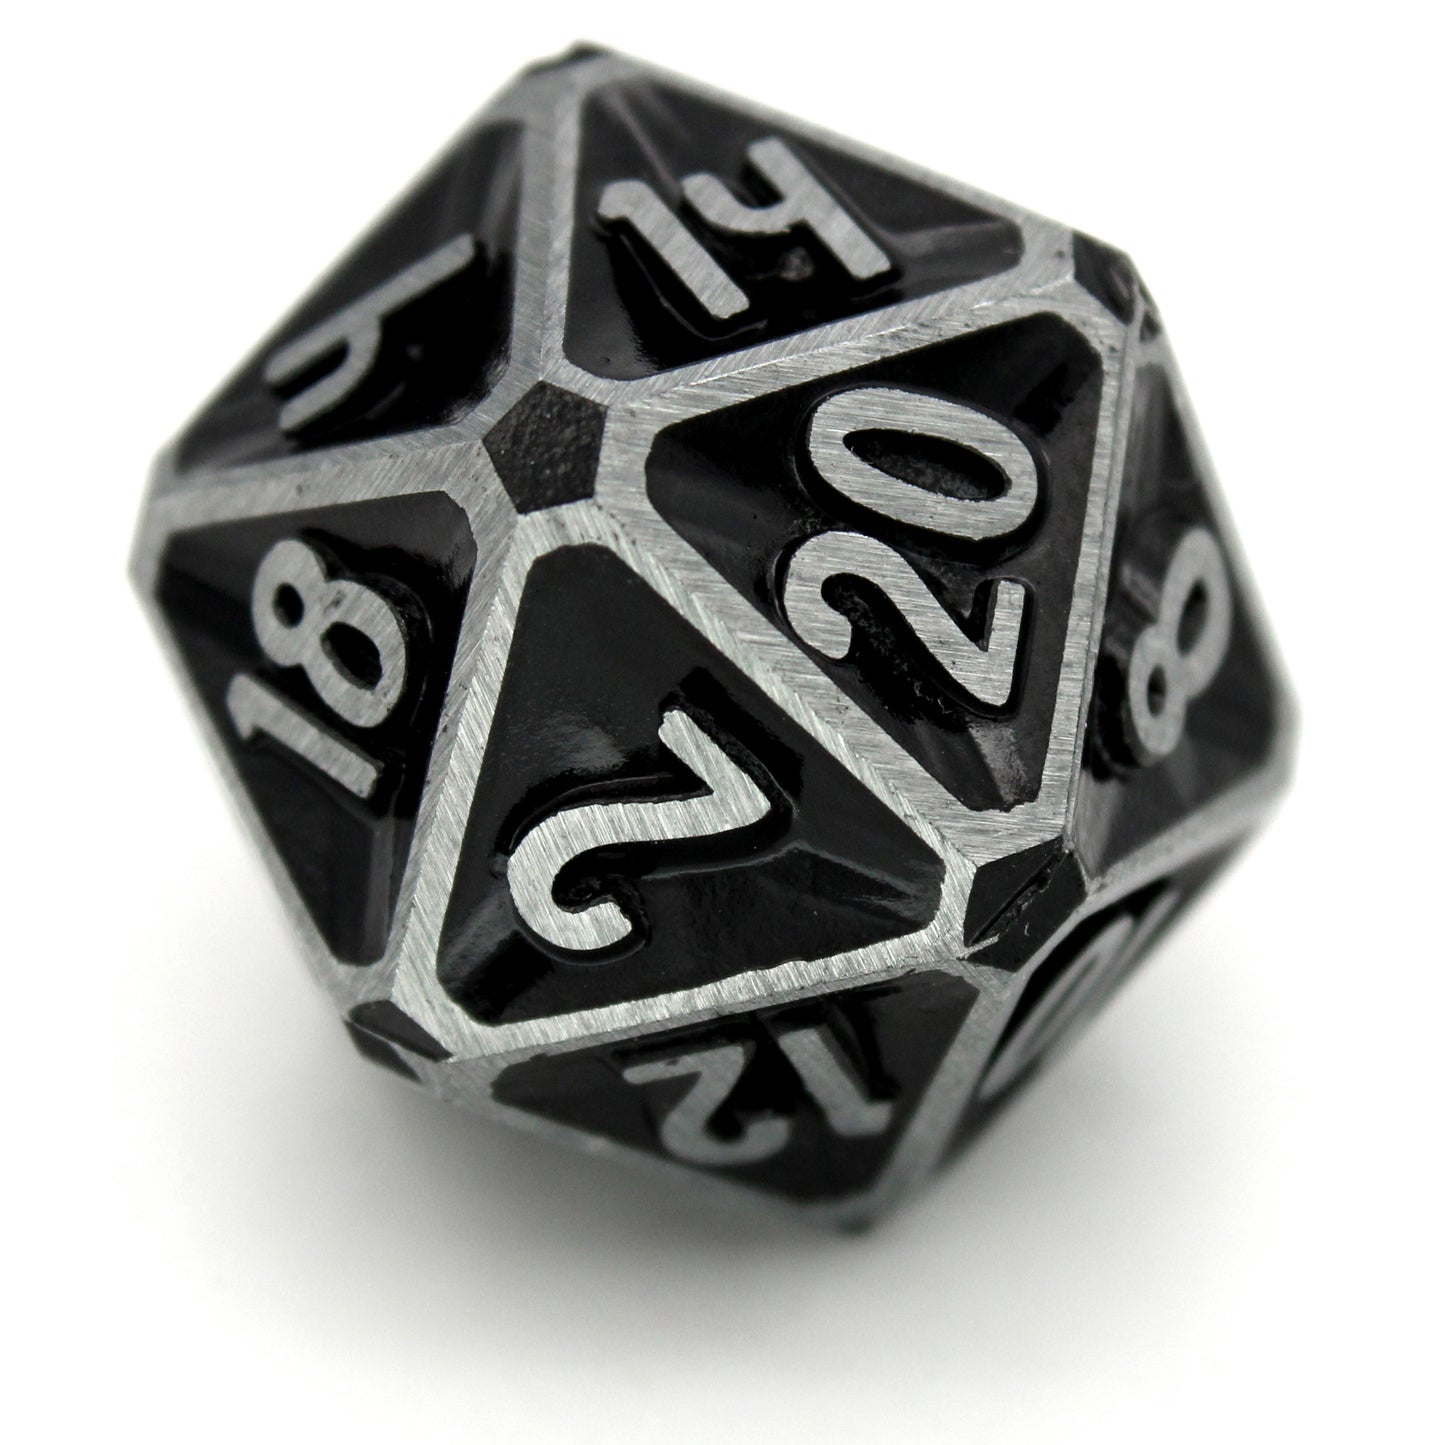 Oath of Conquest is a Dice Envy Exclusive 8-piece set of zinc-alloy, concave, metal dice with a black paint glaze. It is part of the Oathbound collection.